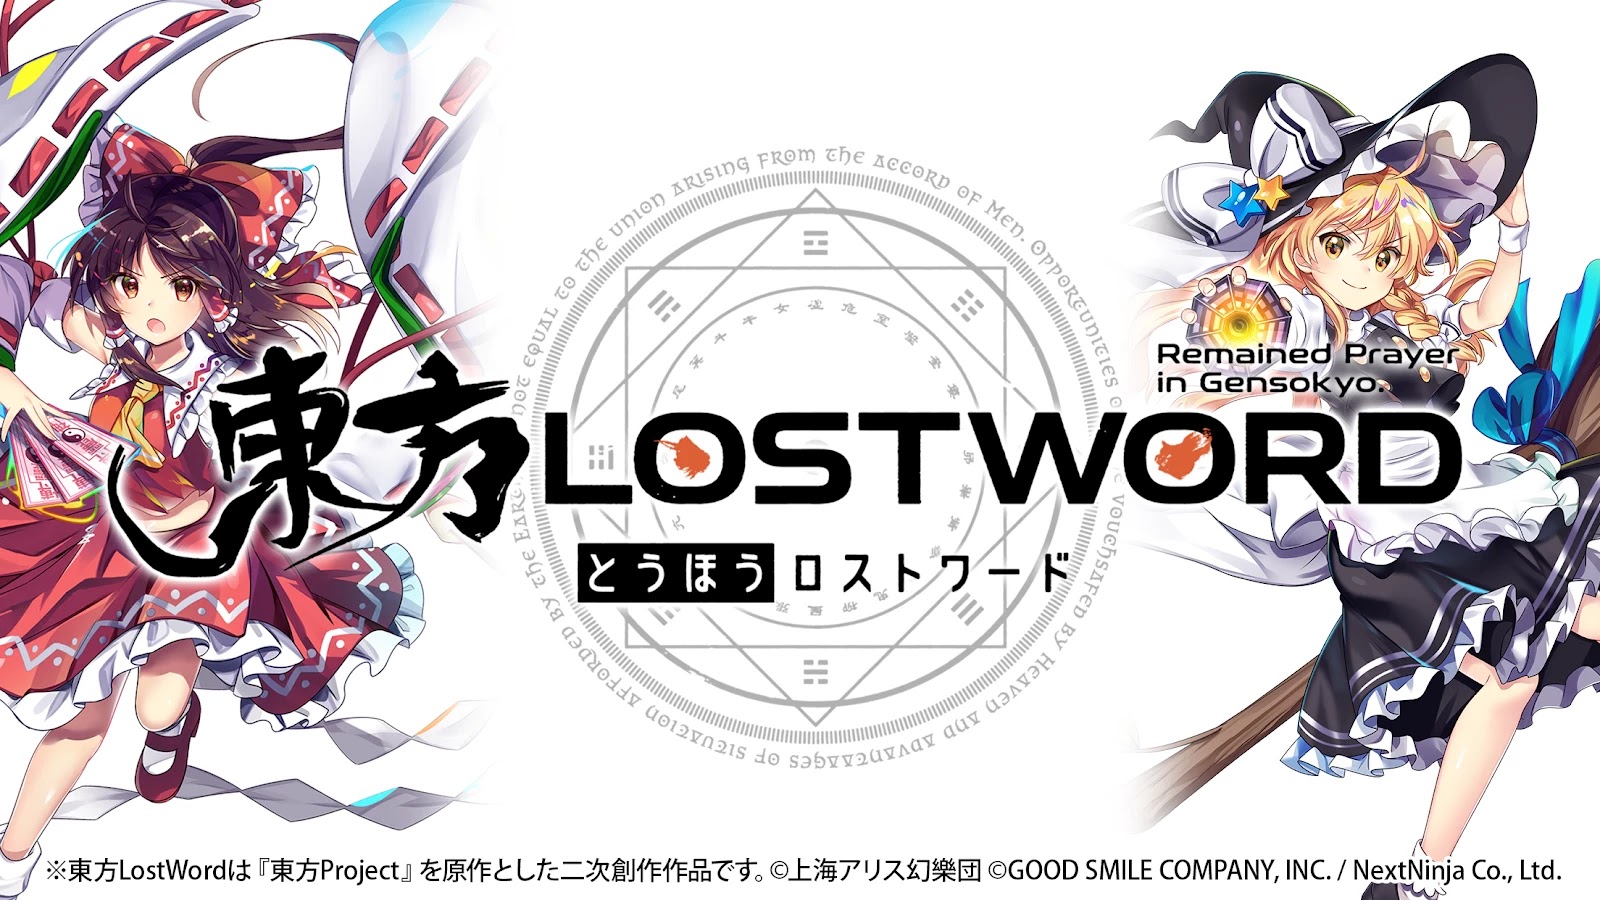 Touhou Lost Word First Official Rpg Touhou Game On Android News About Global Server